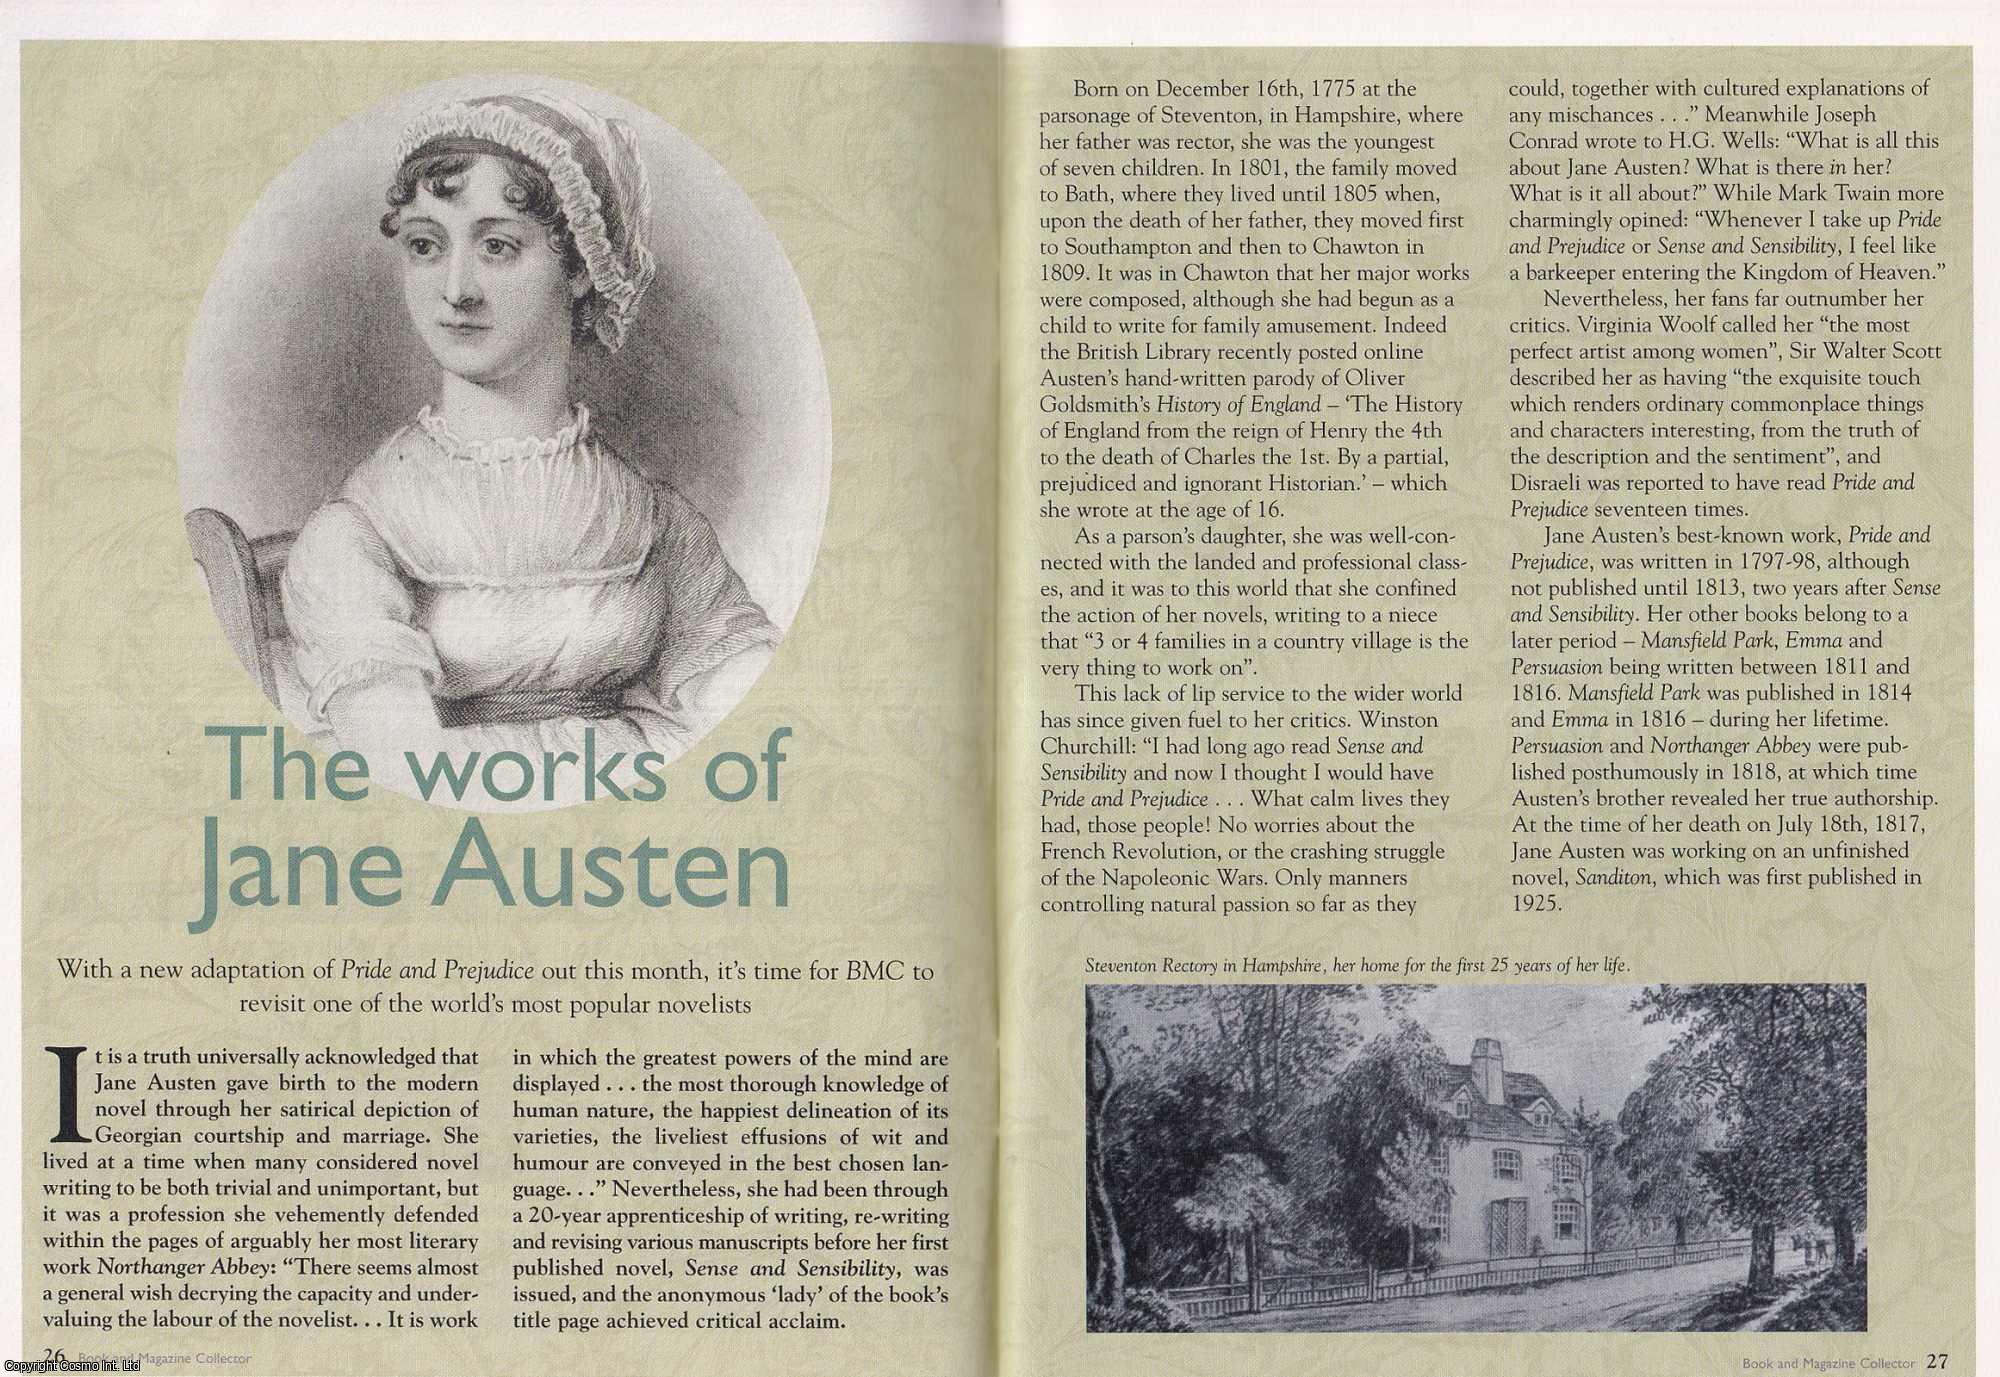 Unstated - The Works of Jane Austen. This is an original article separated from an issue of The Book & Magazine Collector publication.